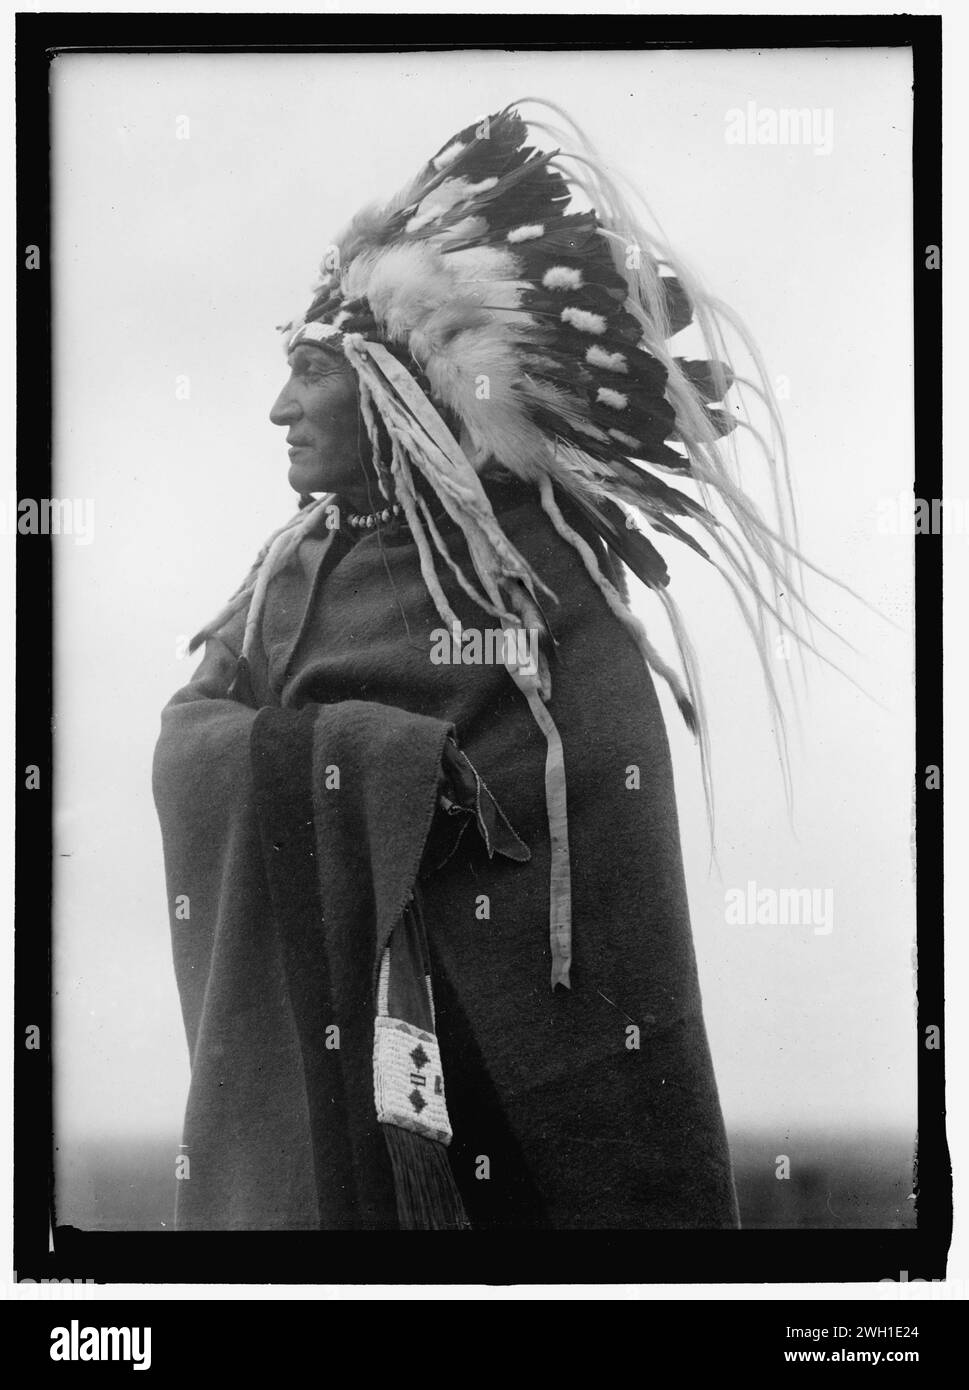 LAZY BOY. INDIAN CHIEF (unverified title) Harris & Ewing, photographer  When using image please quote LC-H261- 3379 [P&P] Stock Photo